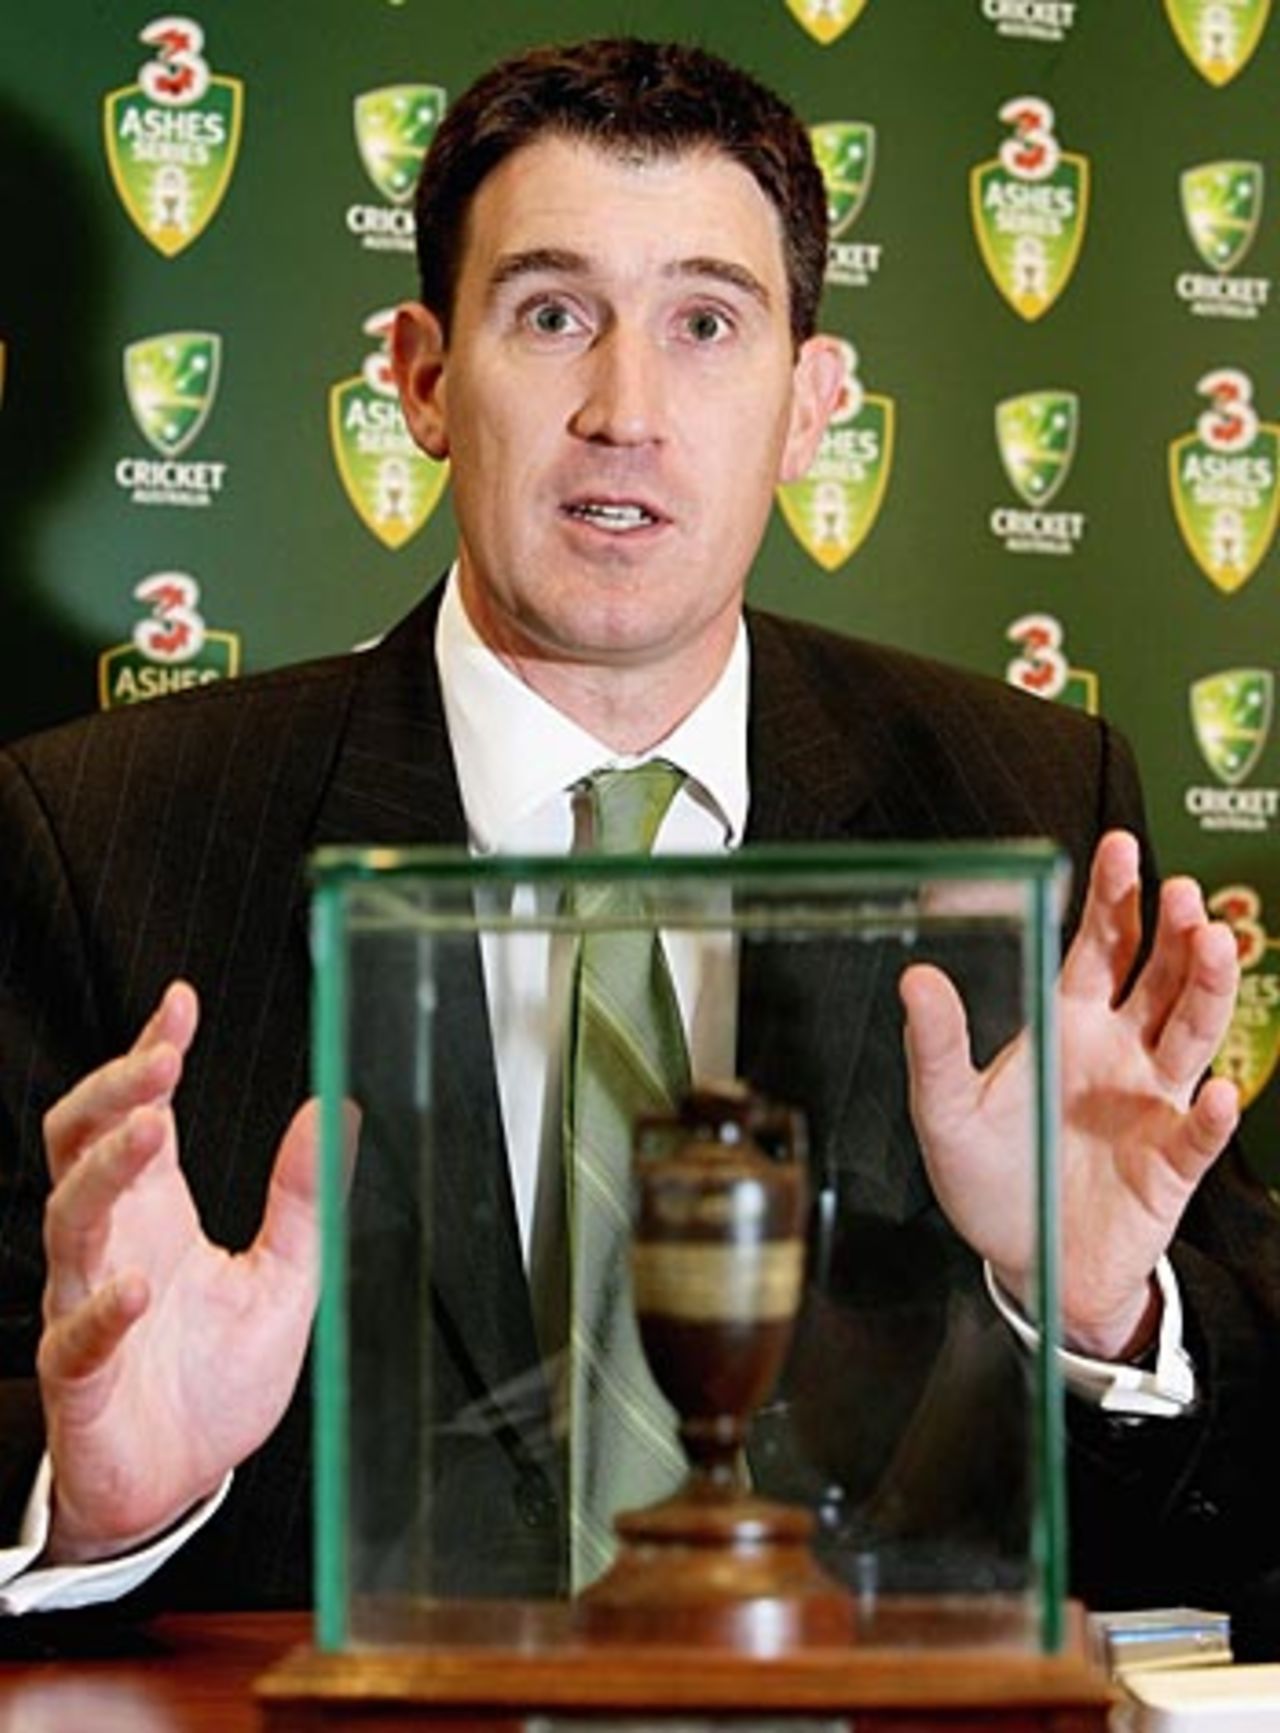 Under fire: Cricket Australia CEO James Sutherland answers media questions about Ashes ticket sales, Melbourne, June 1, 2006